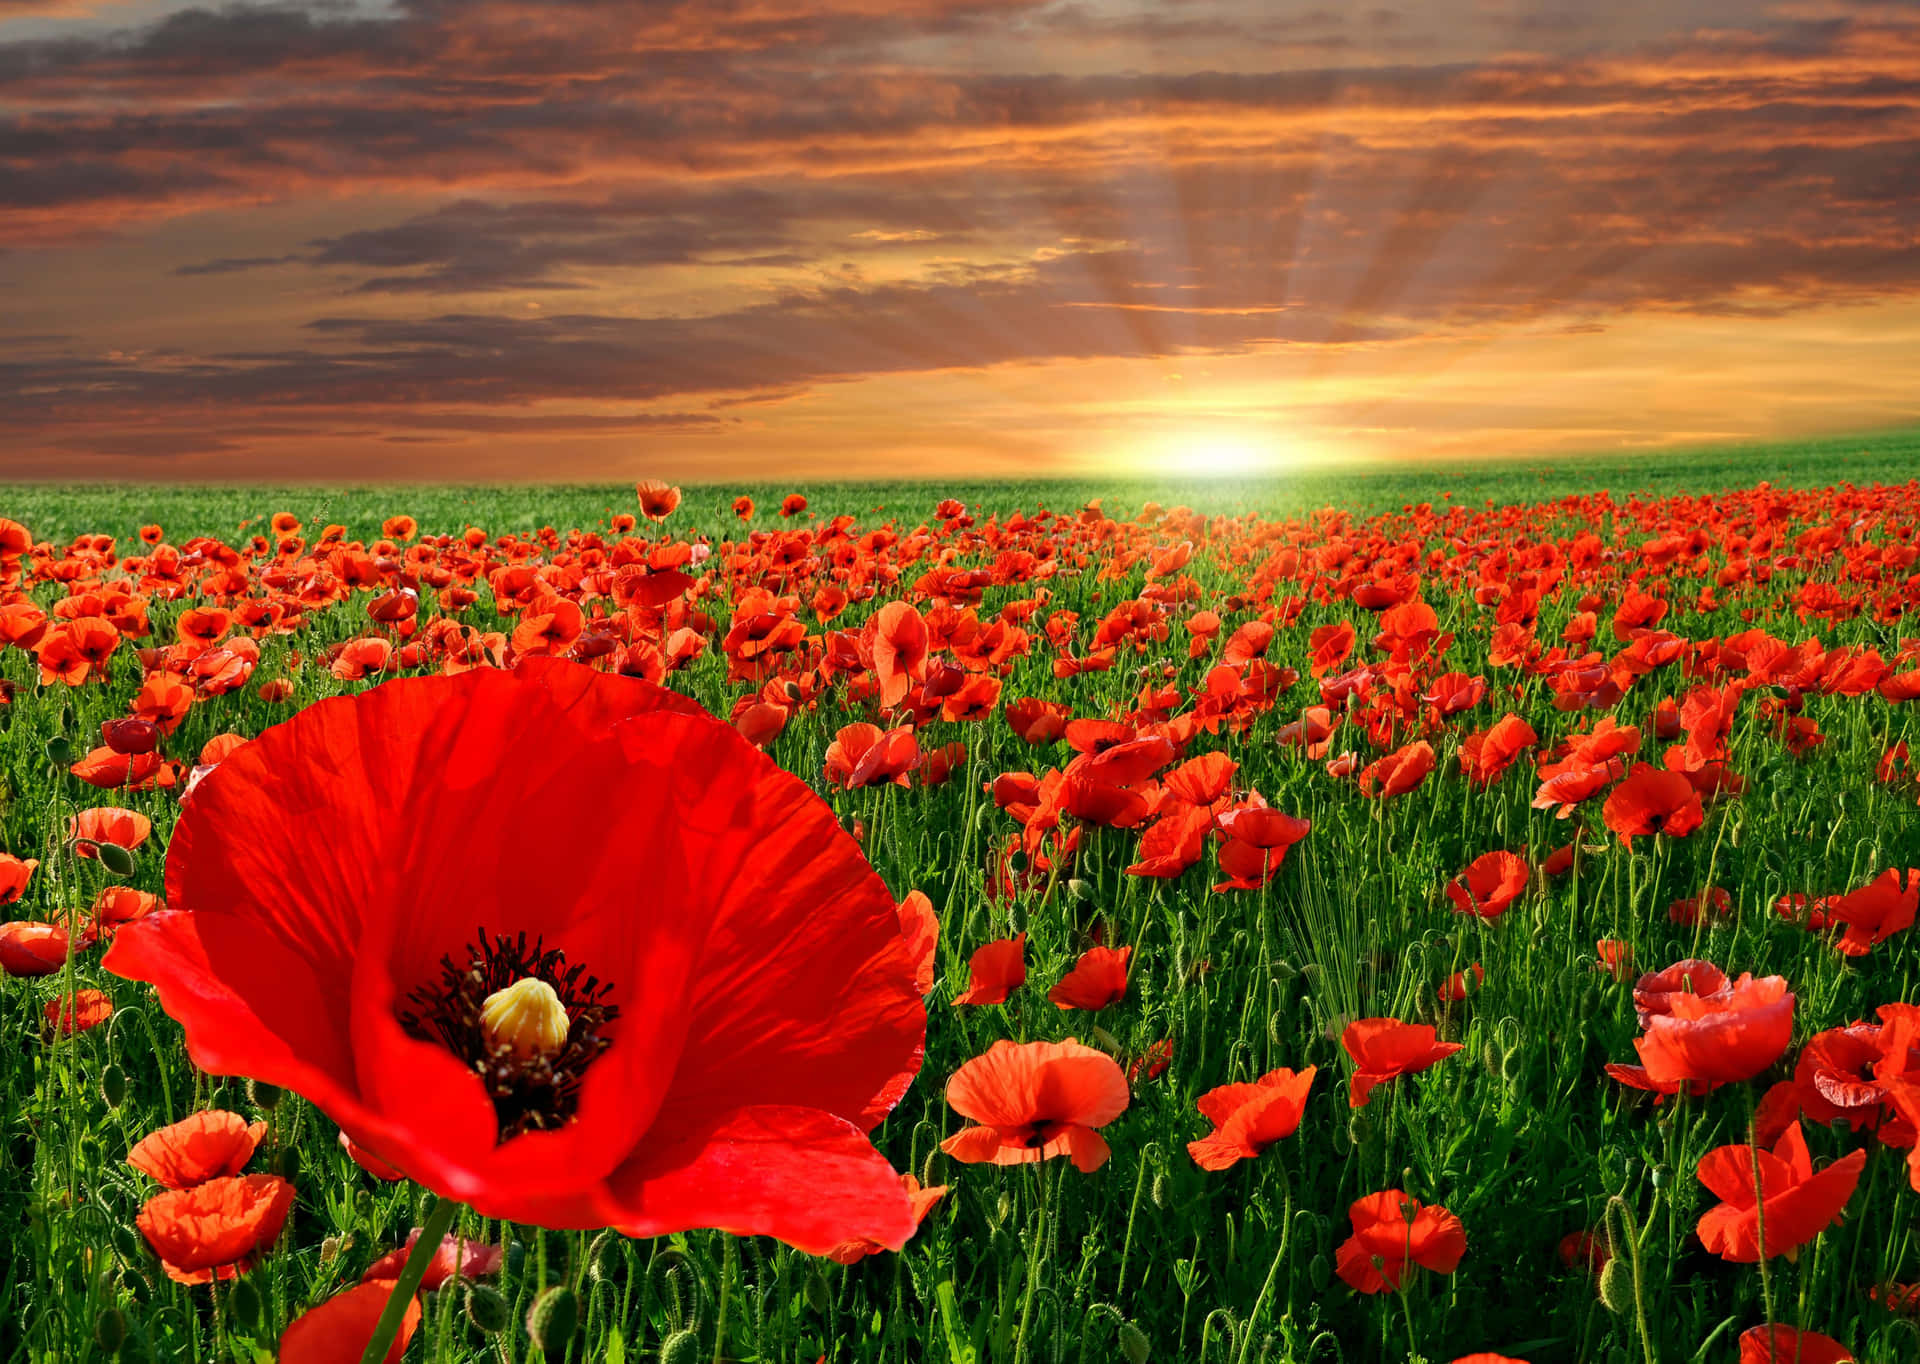 “Brighten up your day with a beautiful Poppy flower”